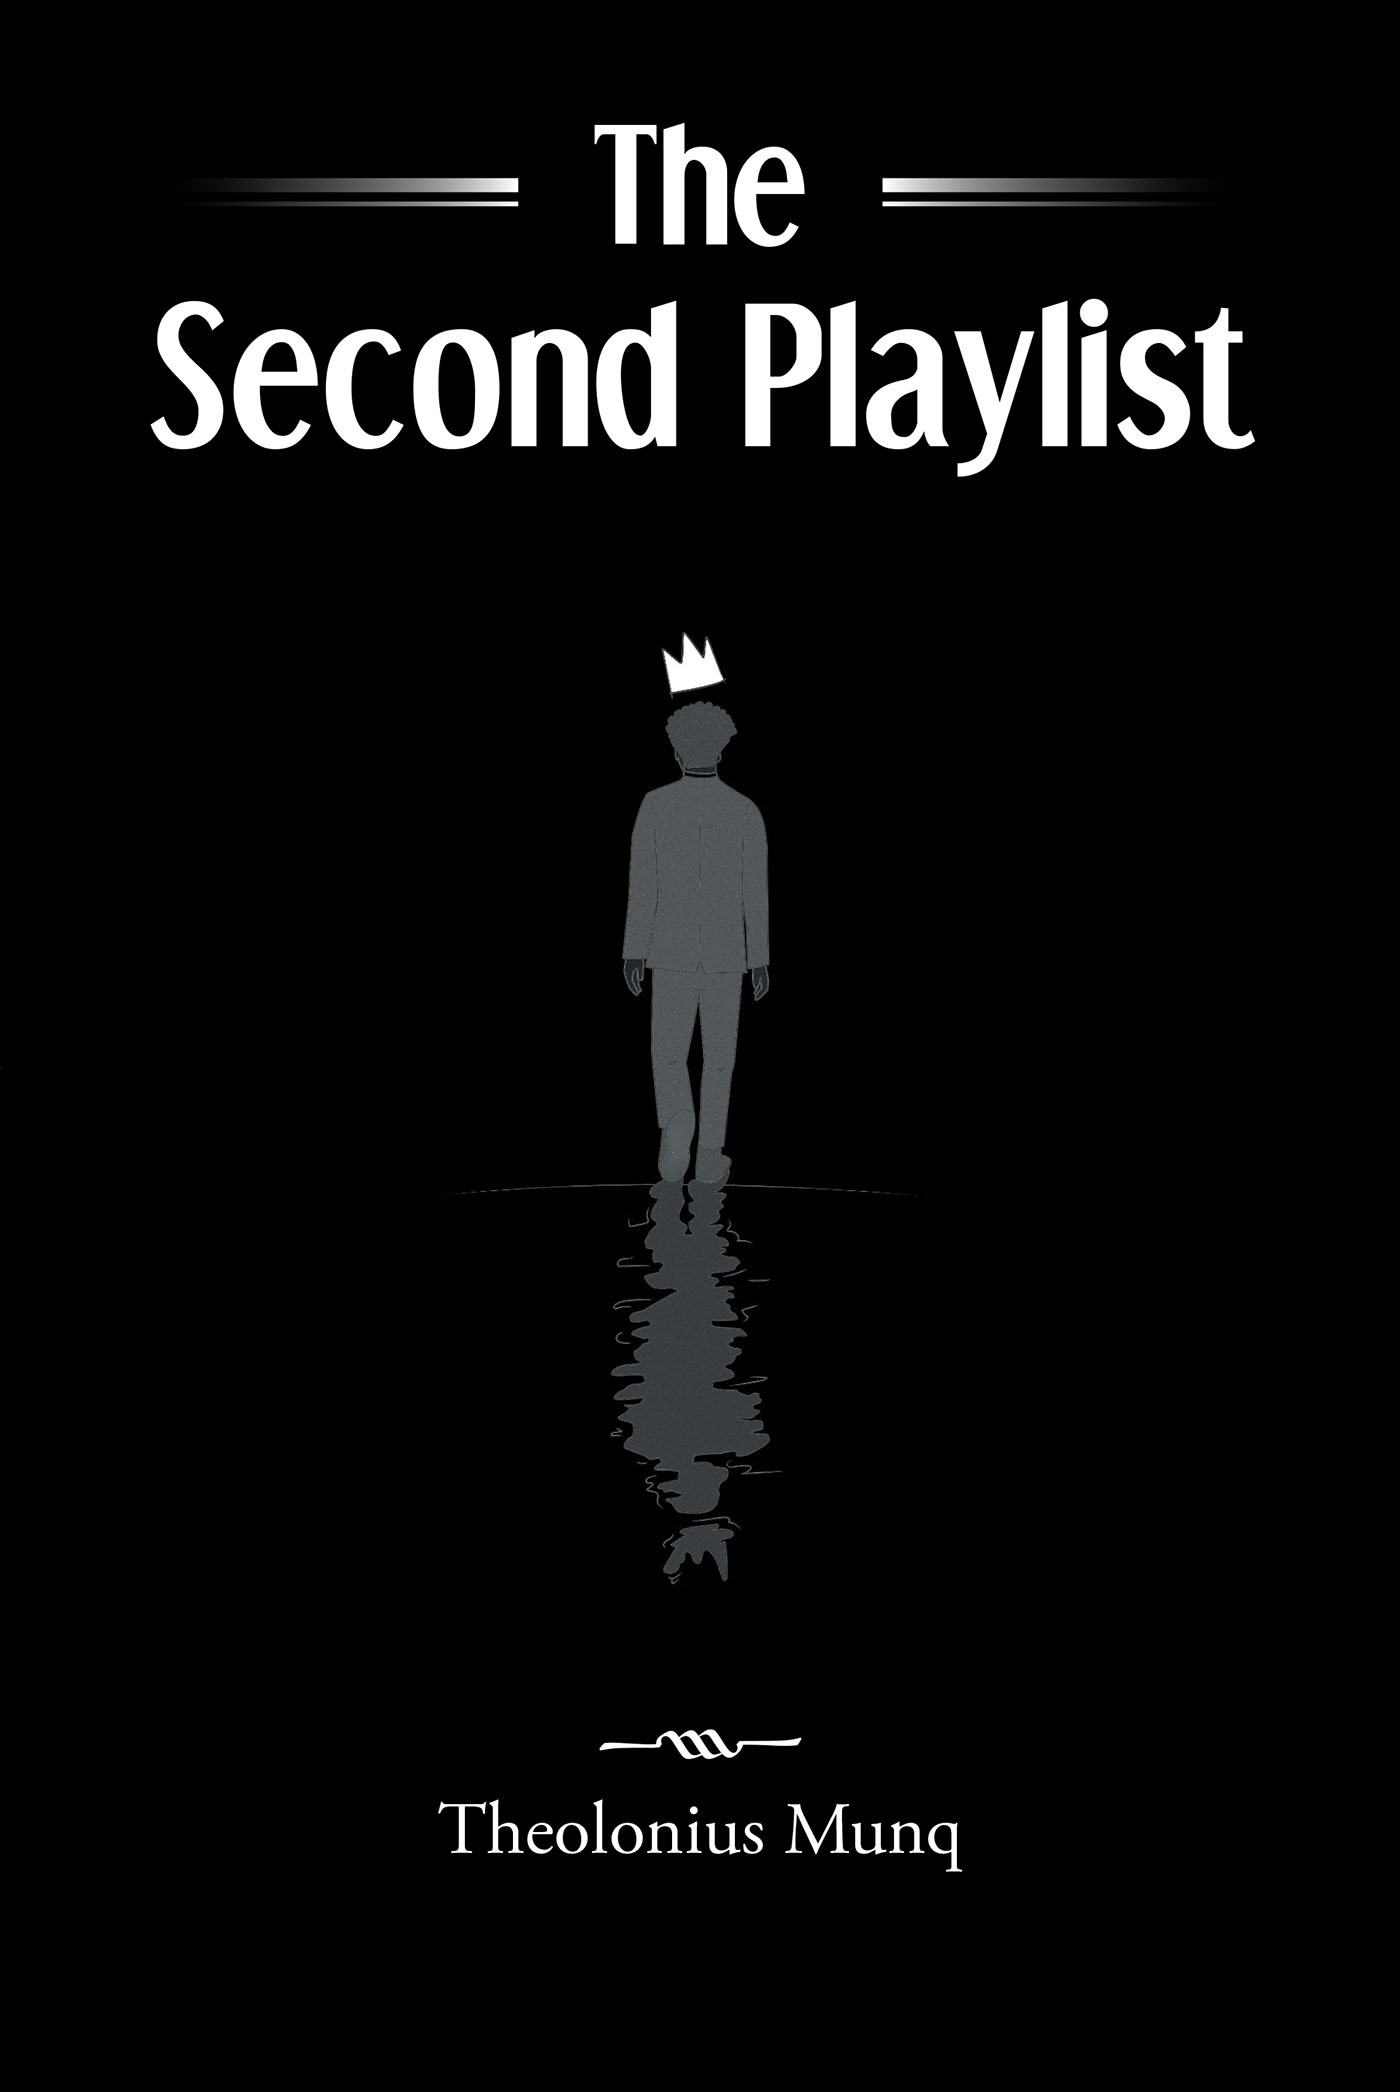 Author Theolonius Munq’s New Book, "the Second Playlist," is a Stunning Series of Poems That Reflect Upon the Author's Heartache and Losses in Life, as Well as His Hope